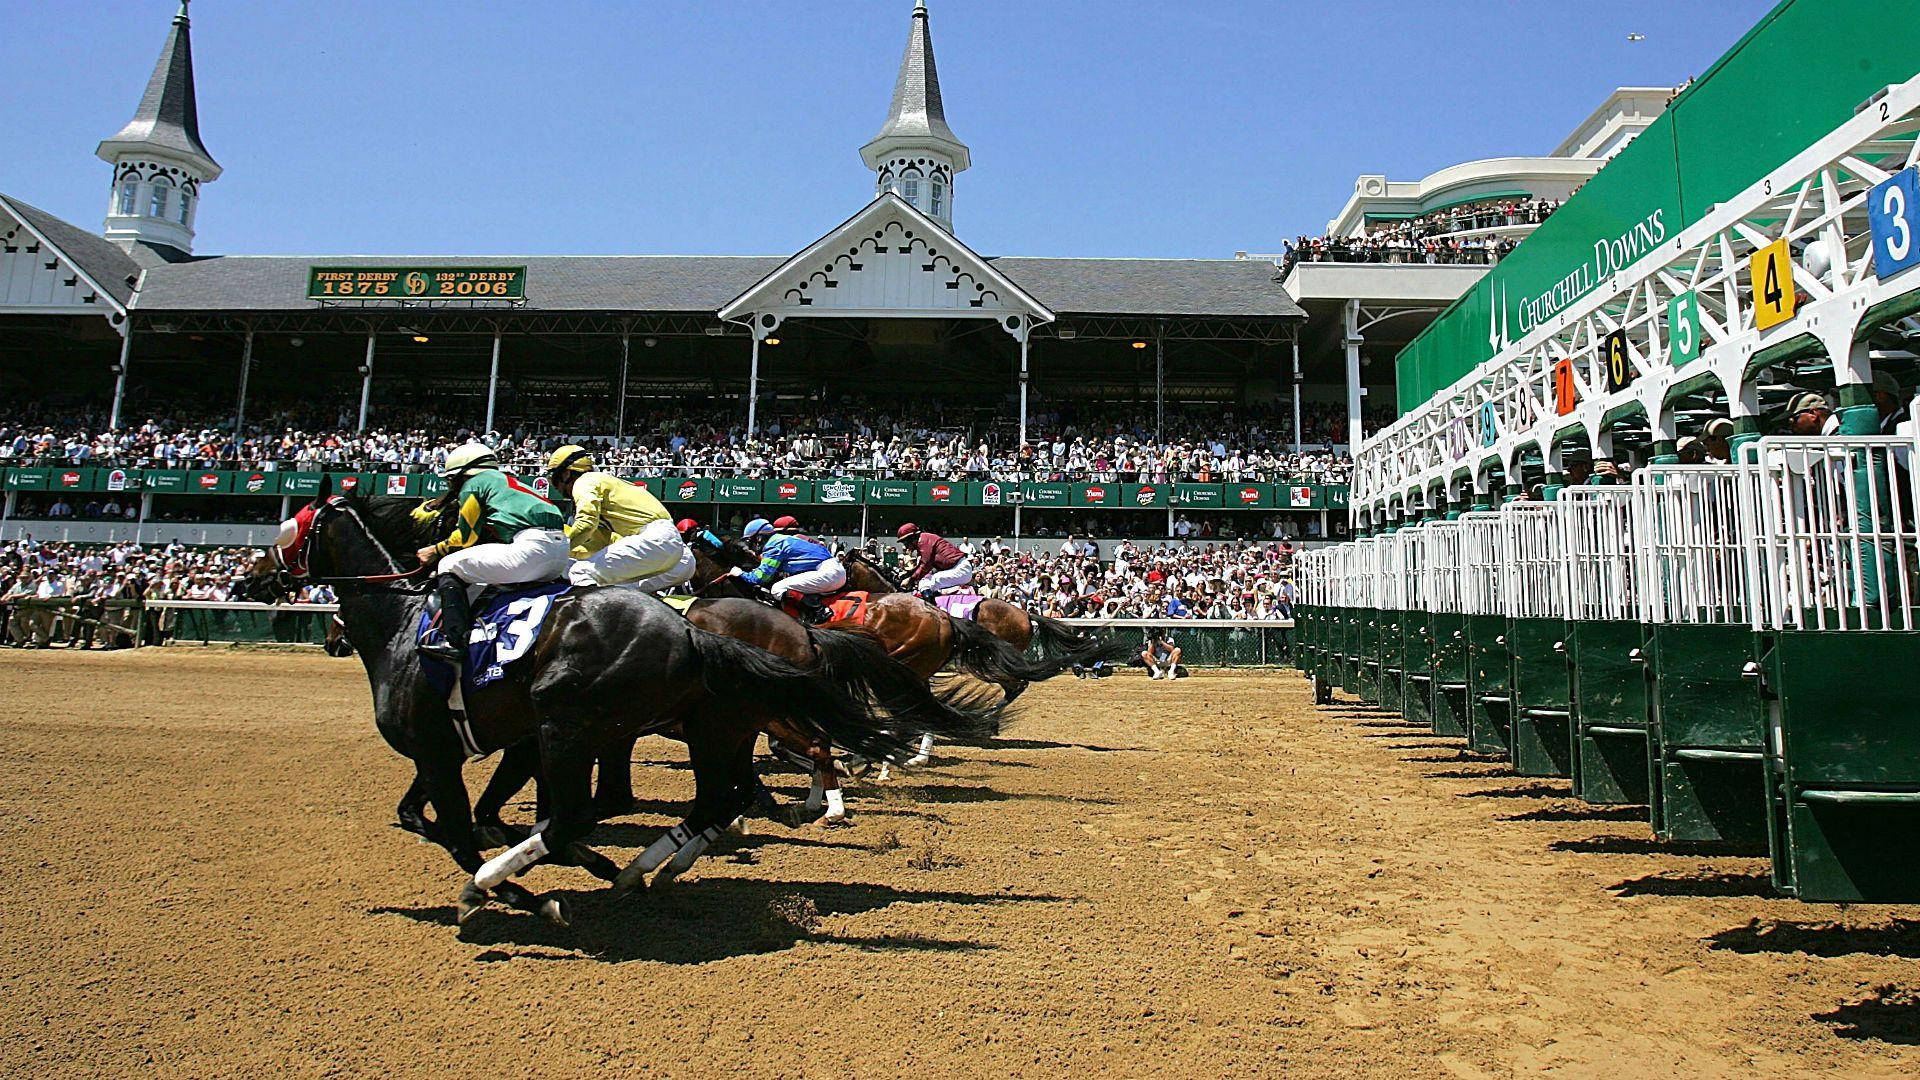 Exciting Moments Captured At The Kentucky Derby Horse Race Festival. Background